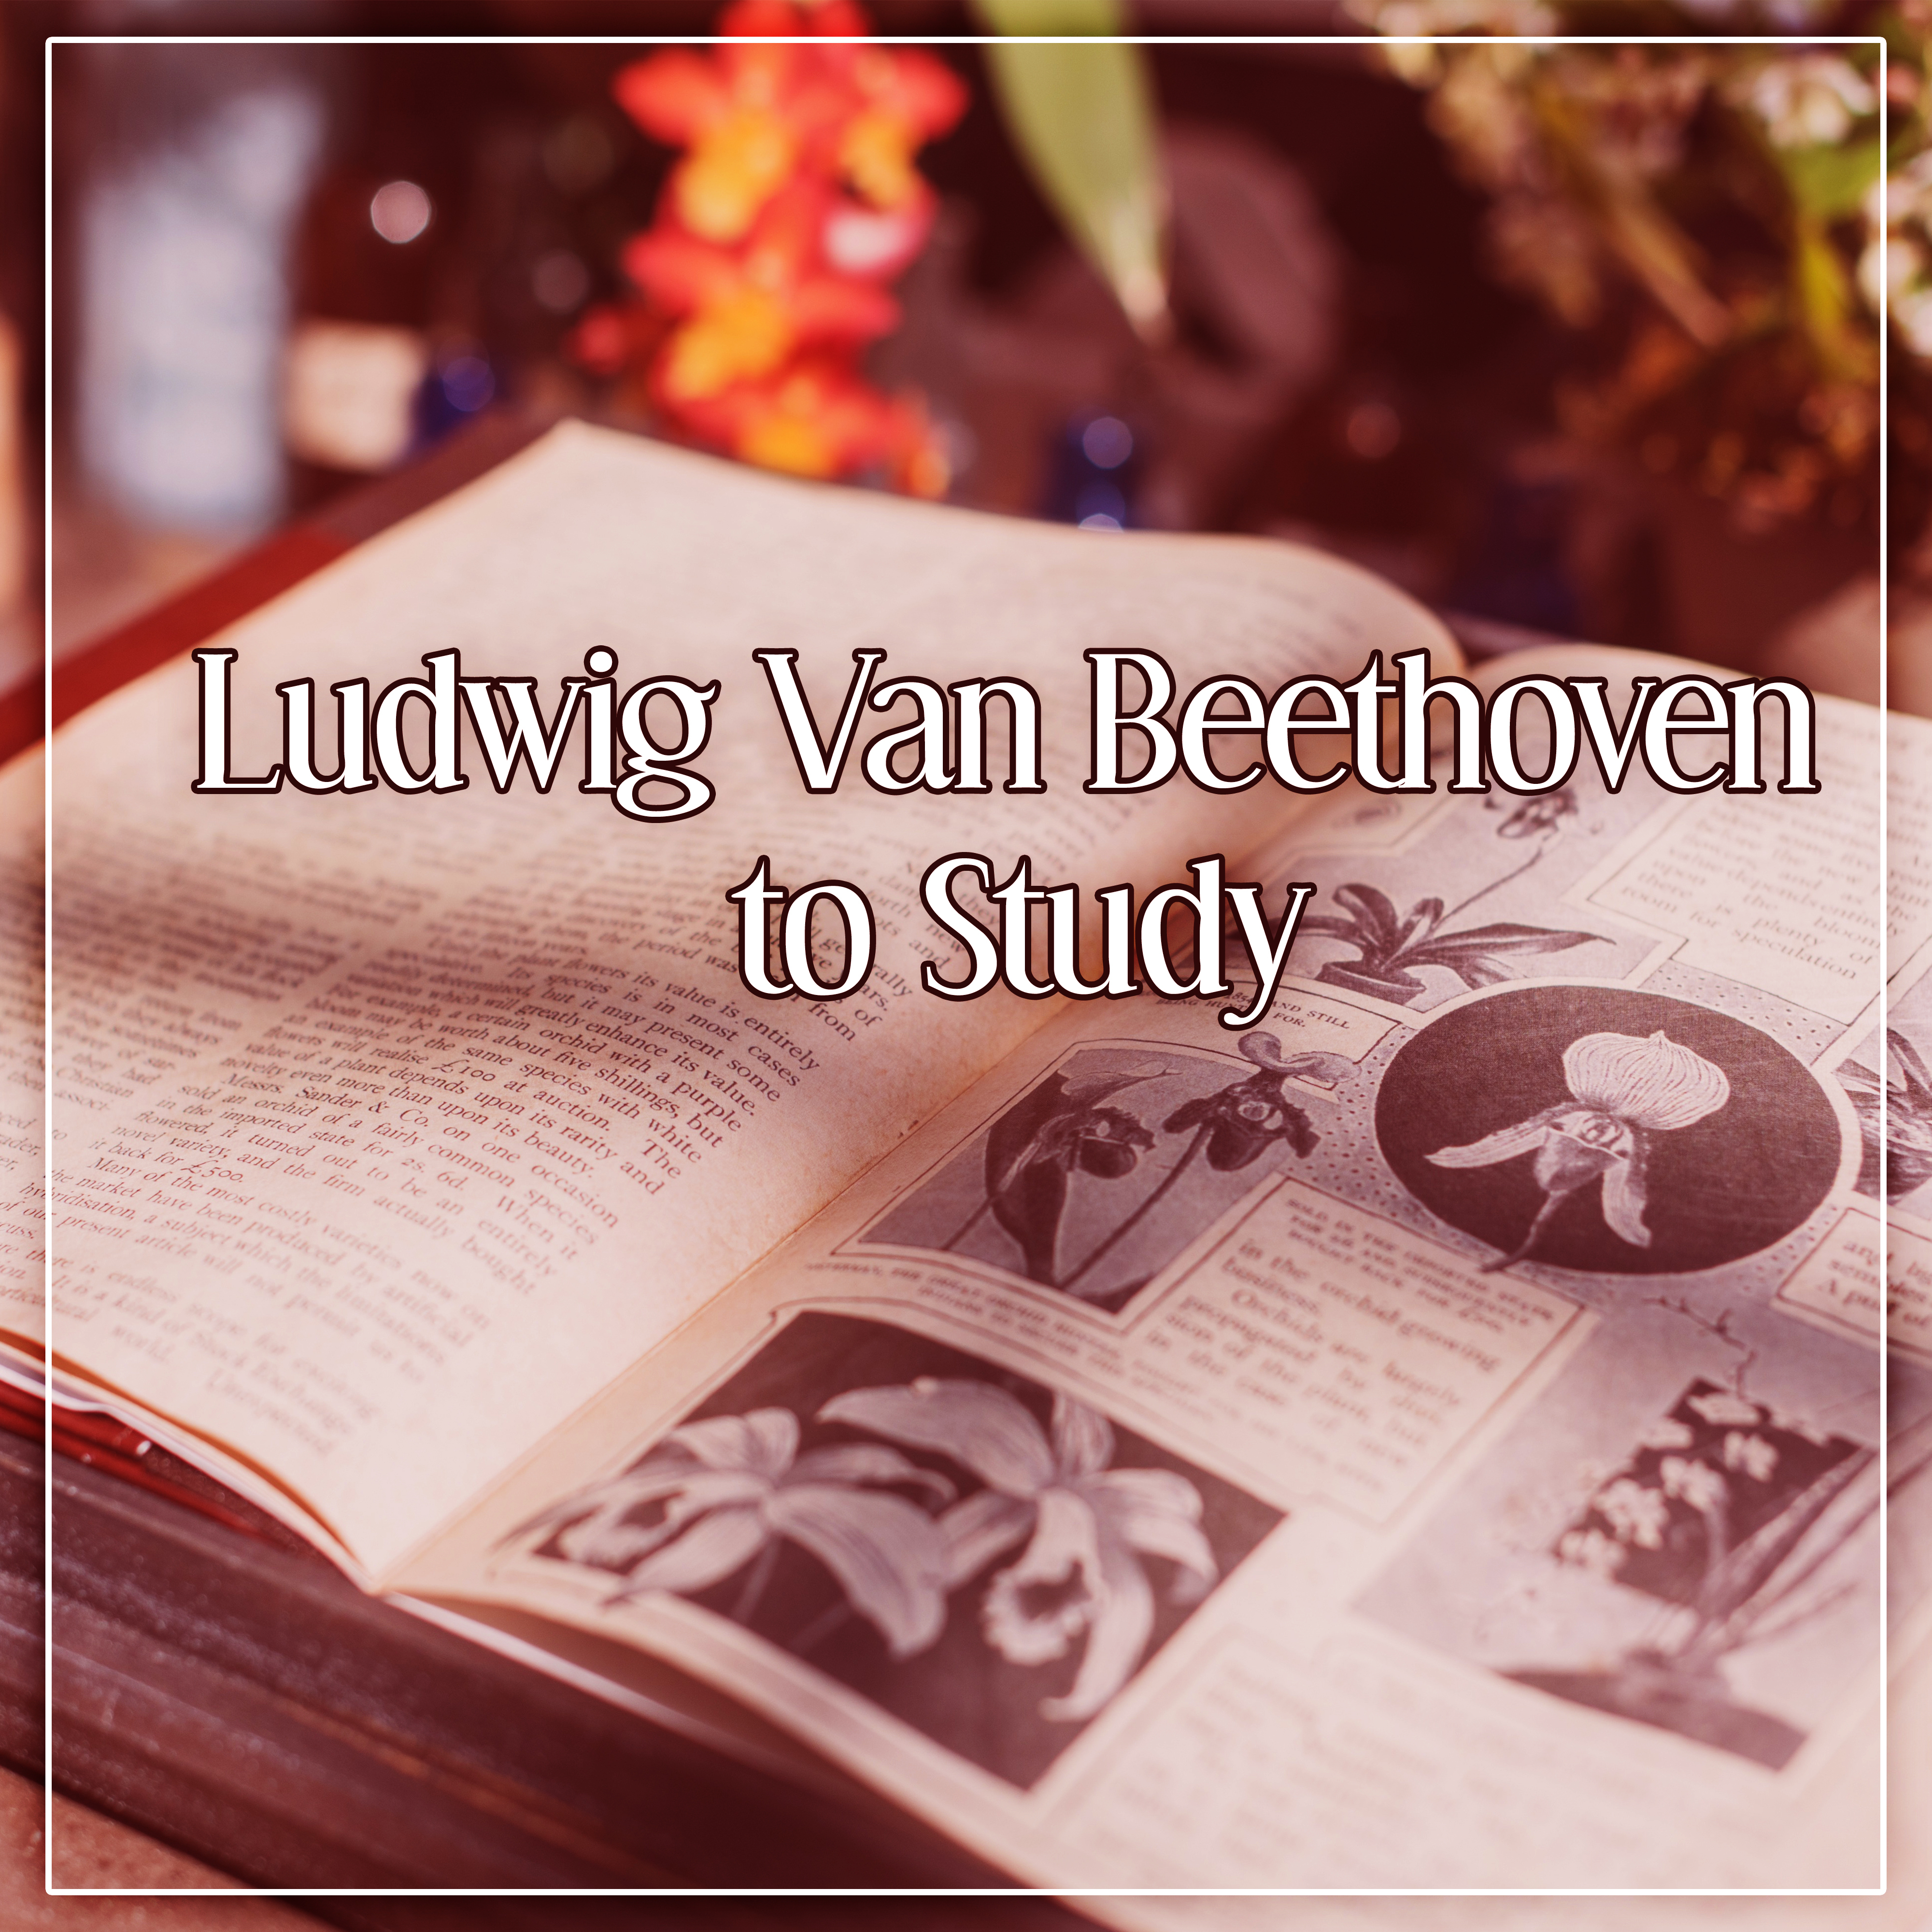 Ludwig Van Beethoven to Study – Train Your Brain, Classical Music to Study, Beethoven Songs, Clear Mind